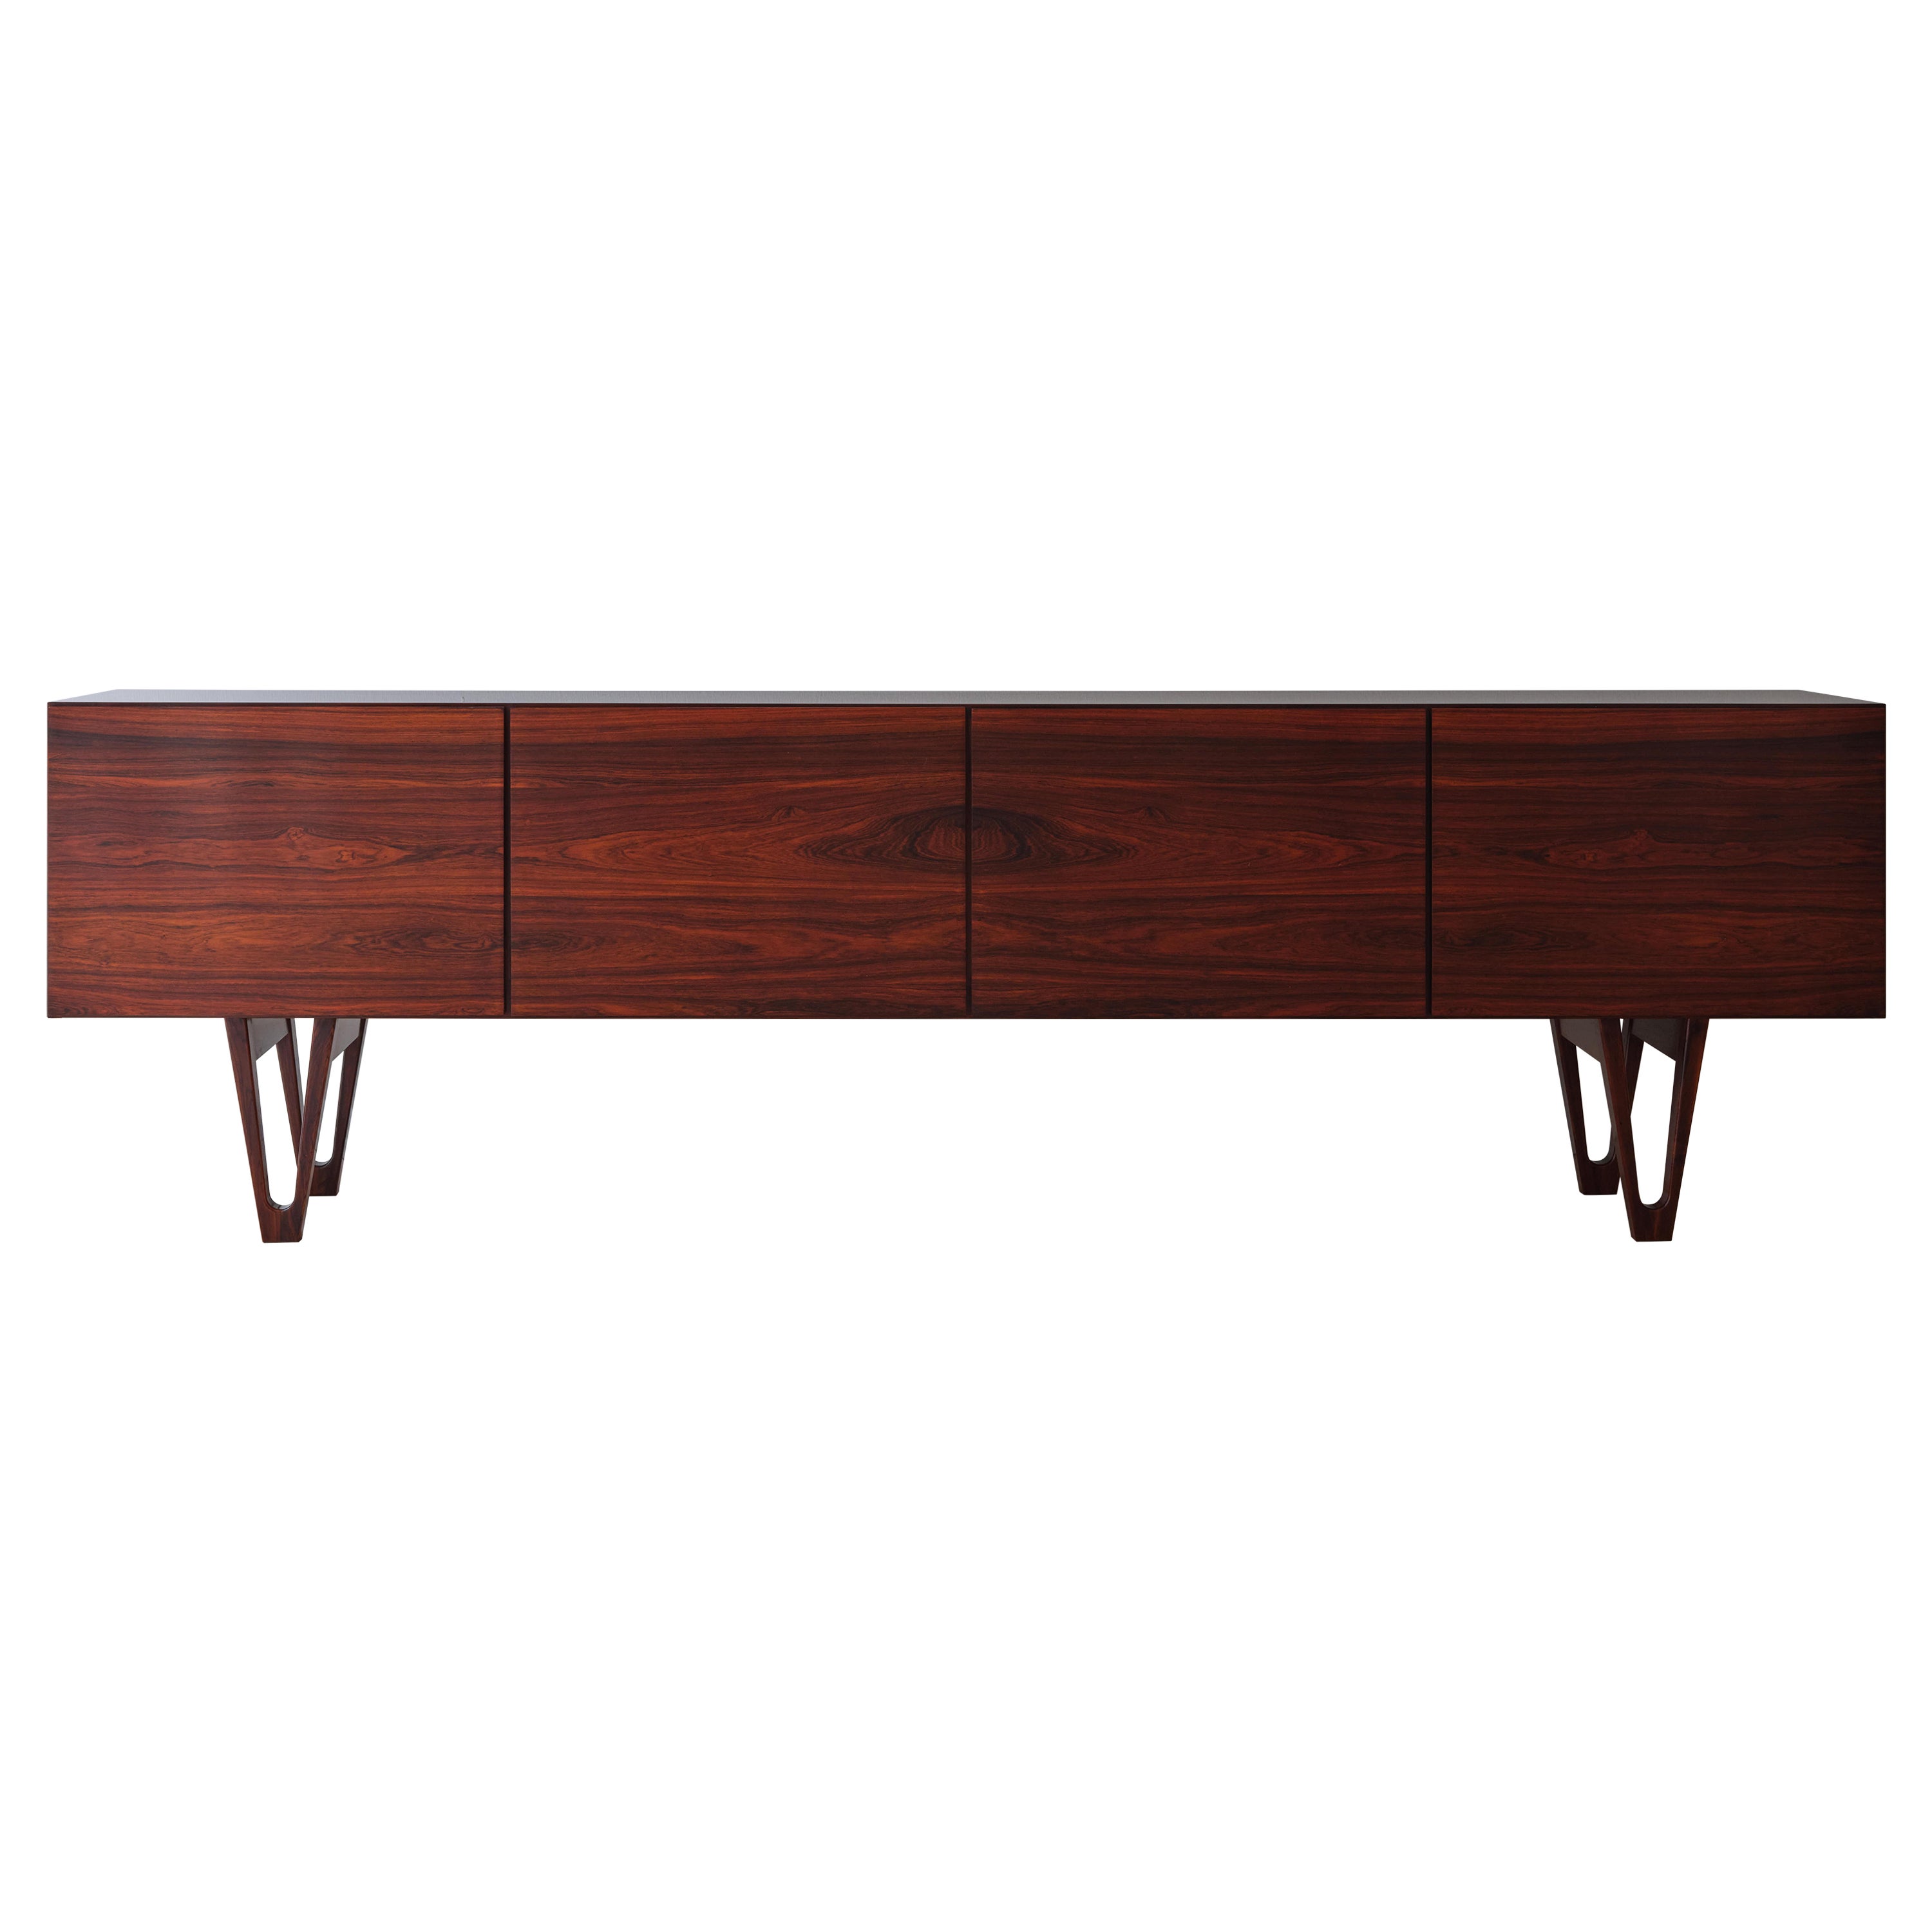 A rare Rio Palisander sideboard designed by Danish designer Ib Kofod Larsen and Produced by Seffle Möbelfabrik, Sweden, Circa 1959-1965. The dramatic figured Rio palisander applied on this long low and simple style sideboard creates an elegant piece